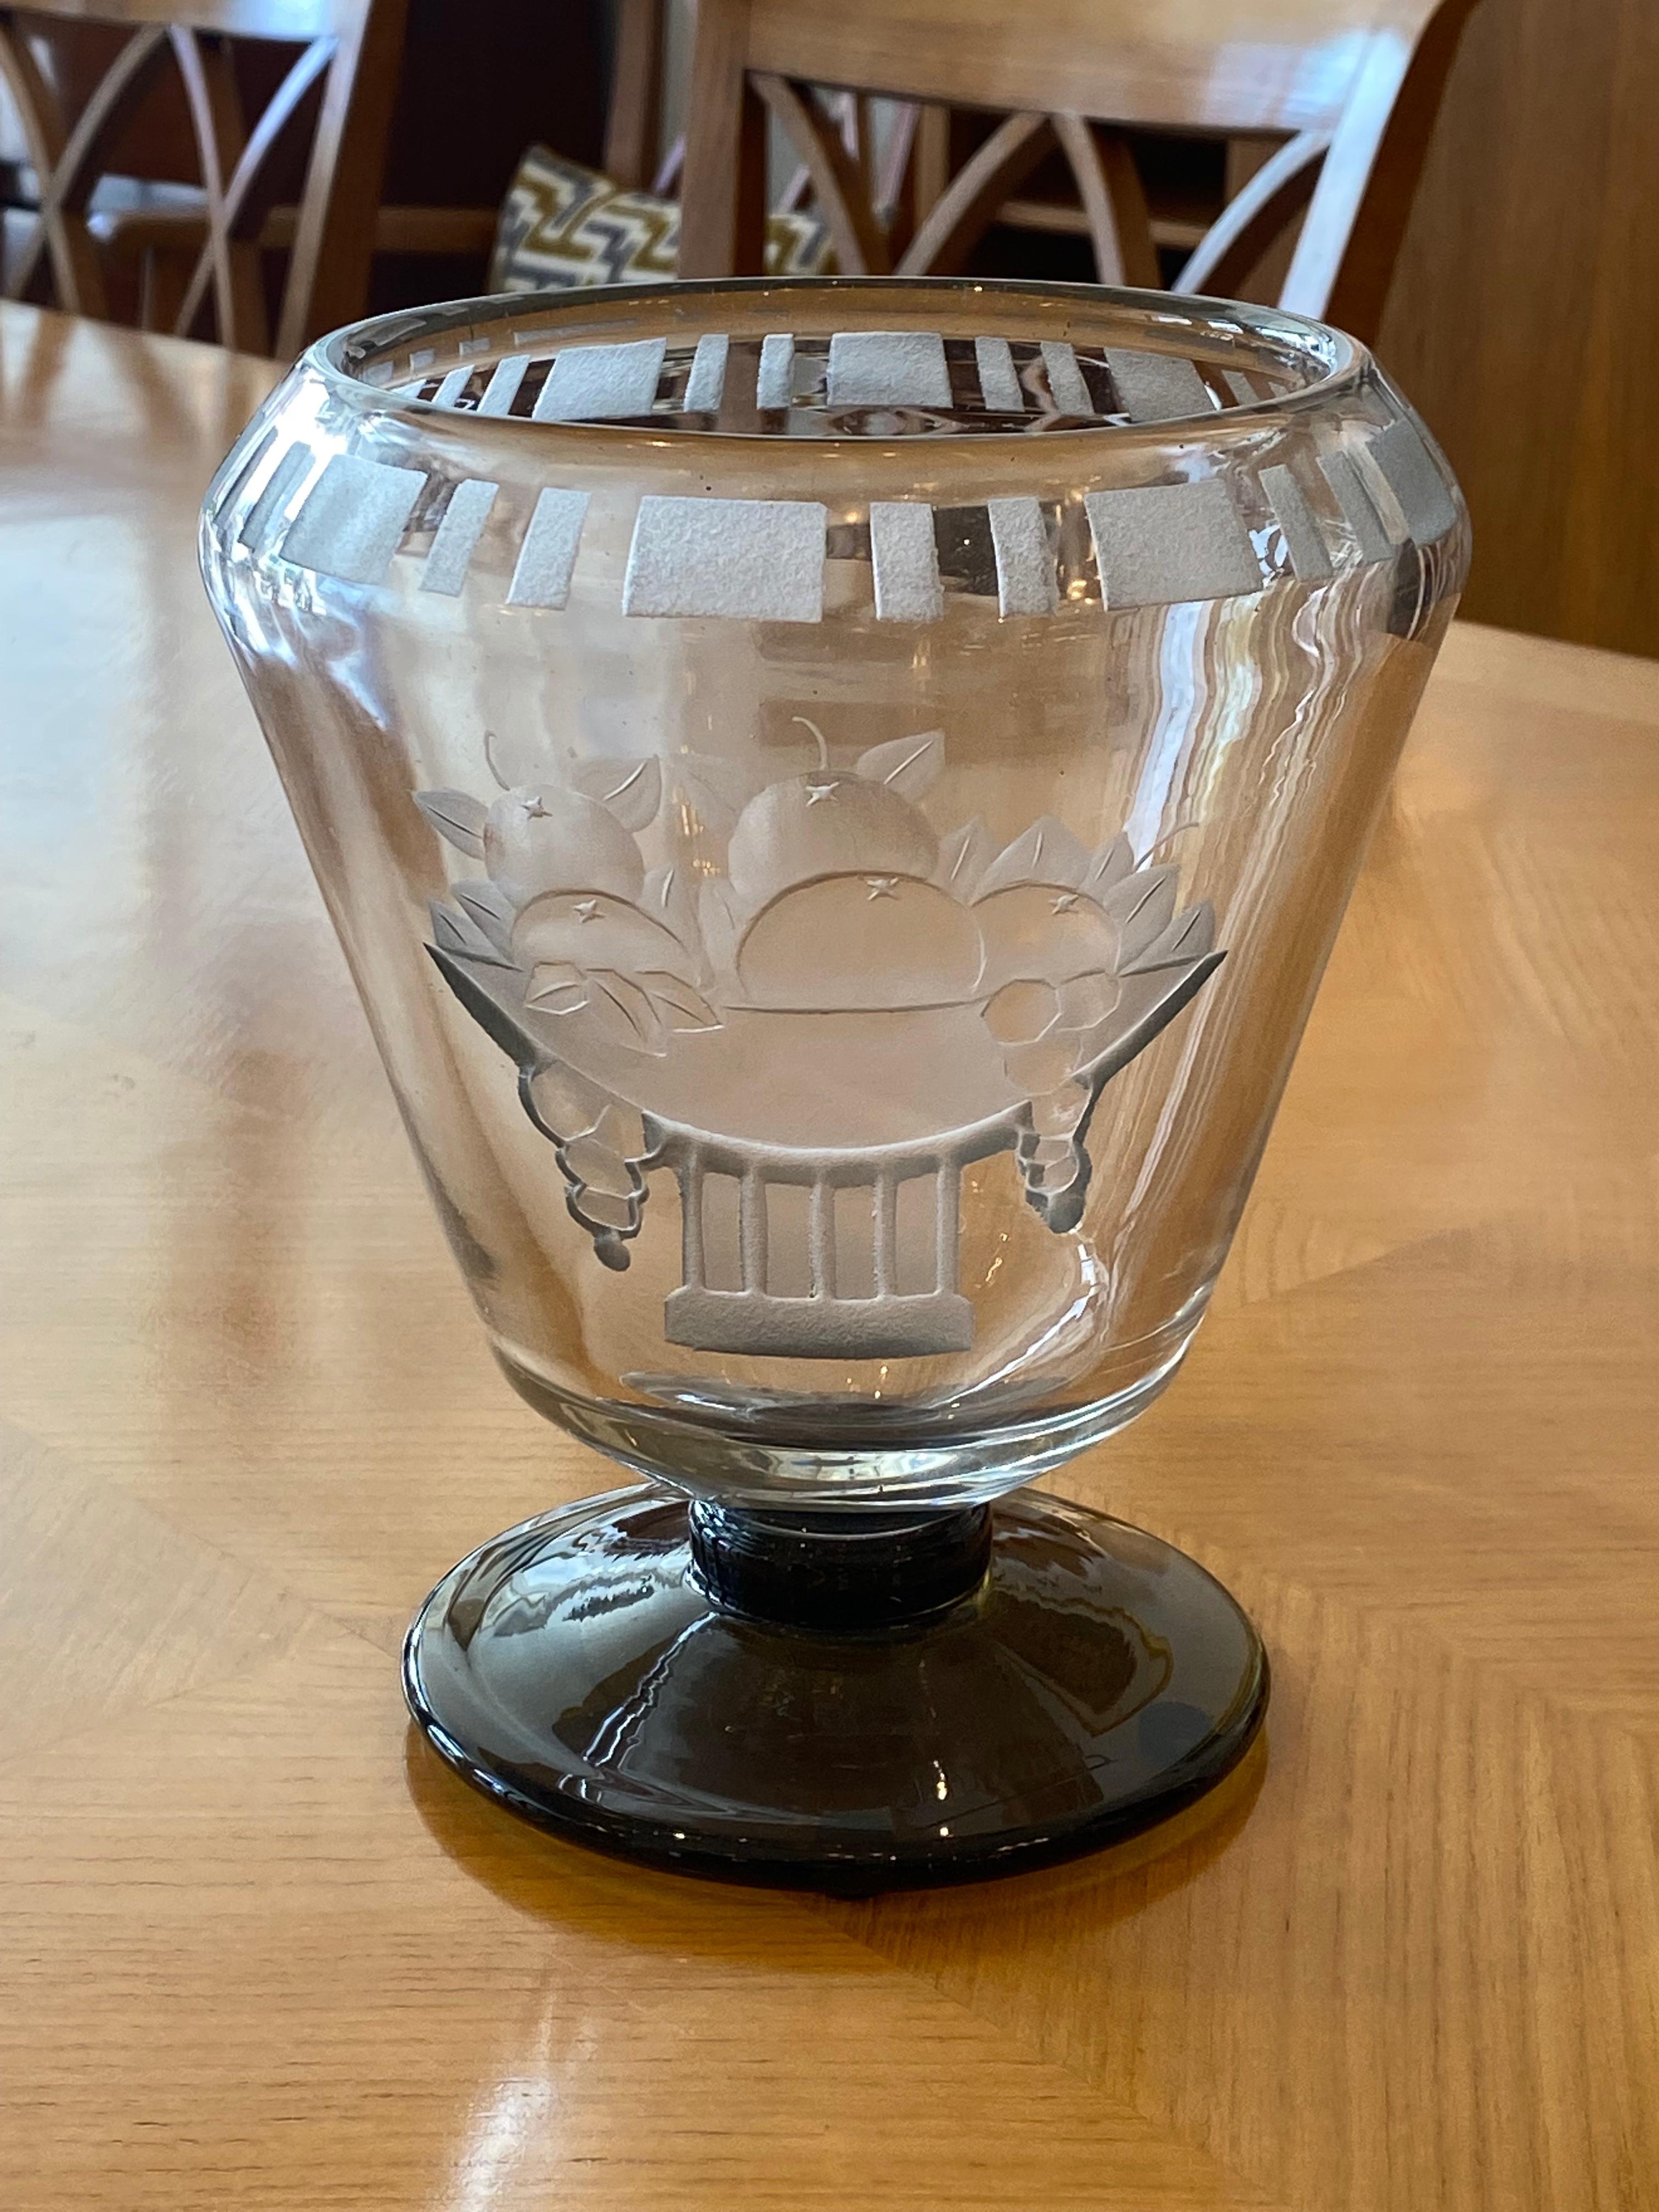 A Clear glass coupe-shaped vase with a fruit basket motif in sandblasting technique, retouched by wheel-carving.  Foot in Grey in powdered glass. 
This piece is from the Corbeille serie of Charles Schneider.
Signed by Charles Schneider.

Charles